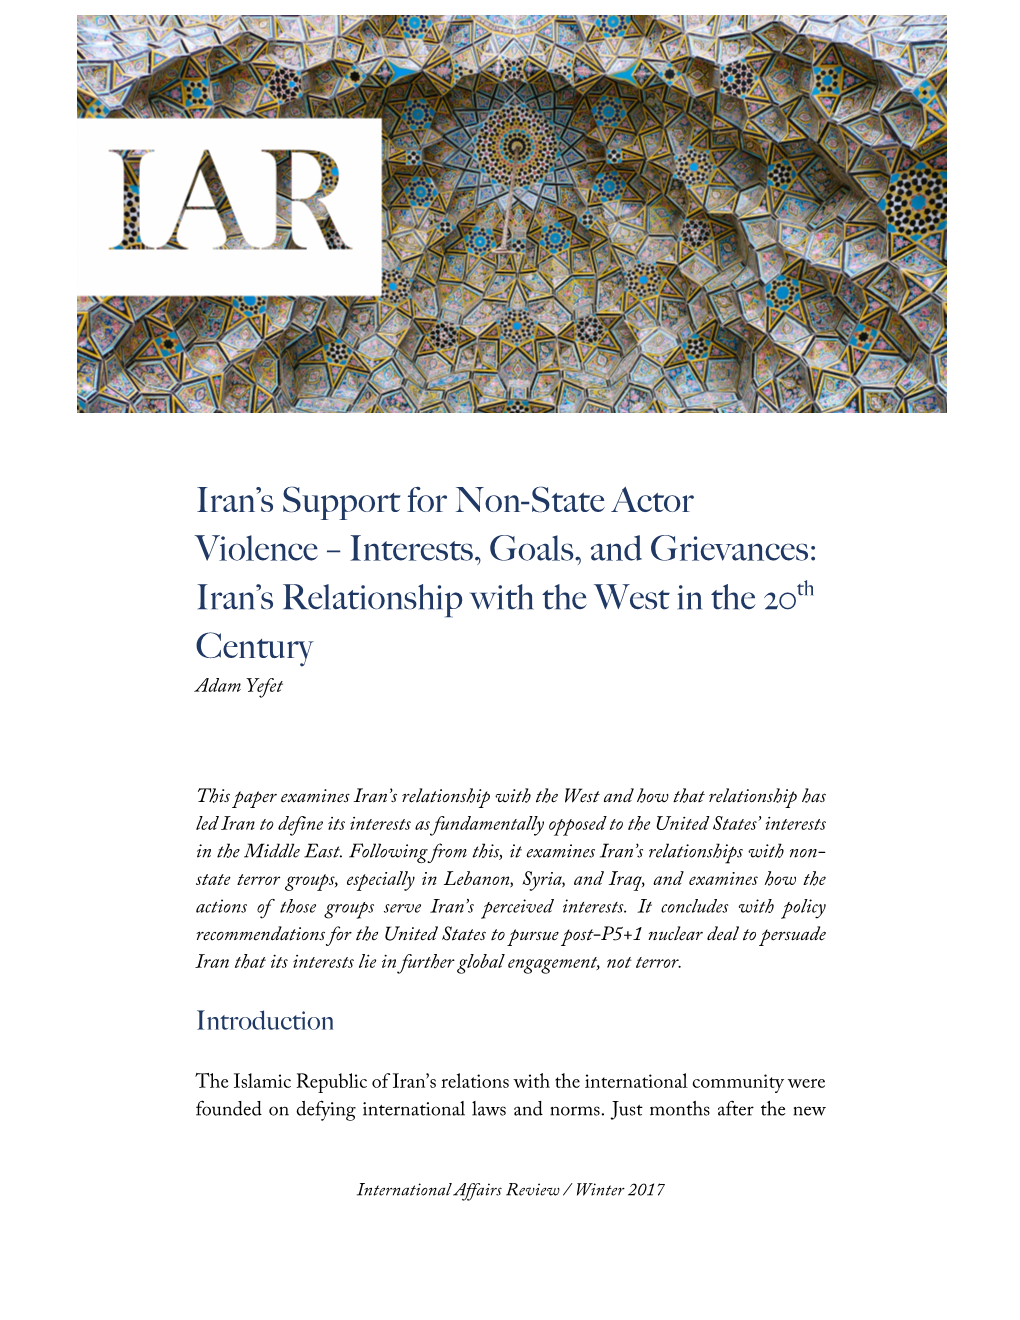 Iran's Support for Non-State Actor Violence